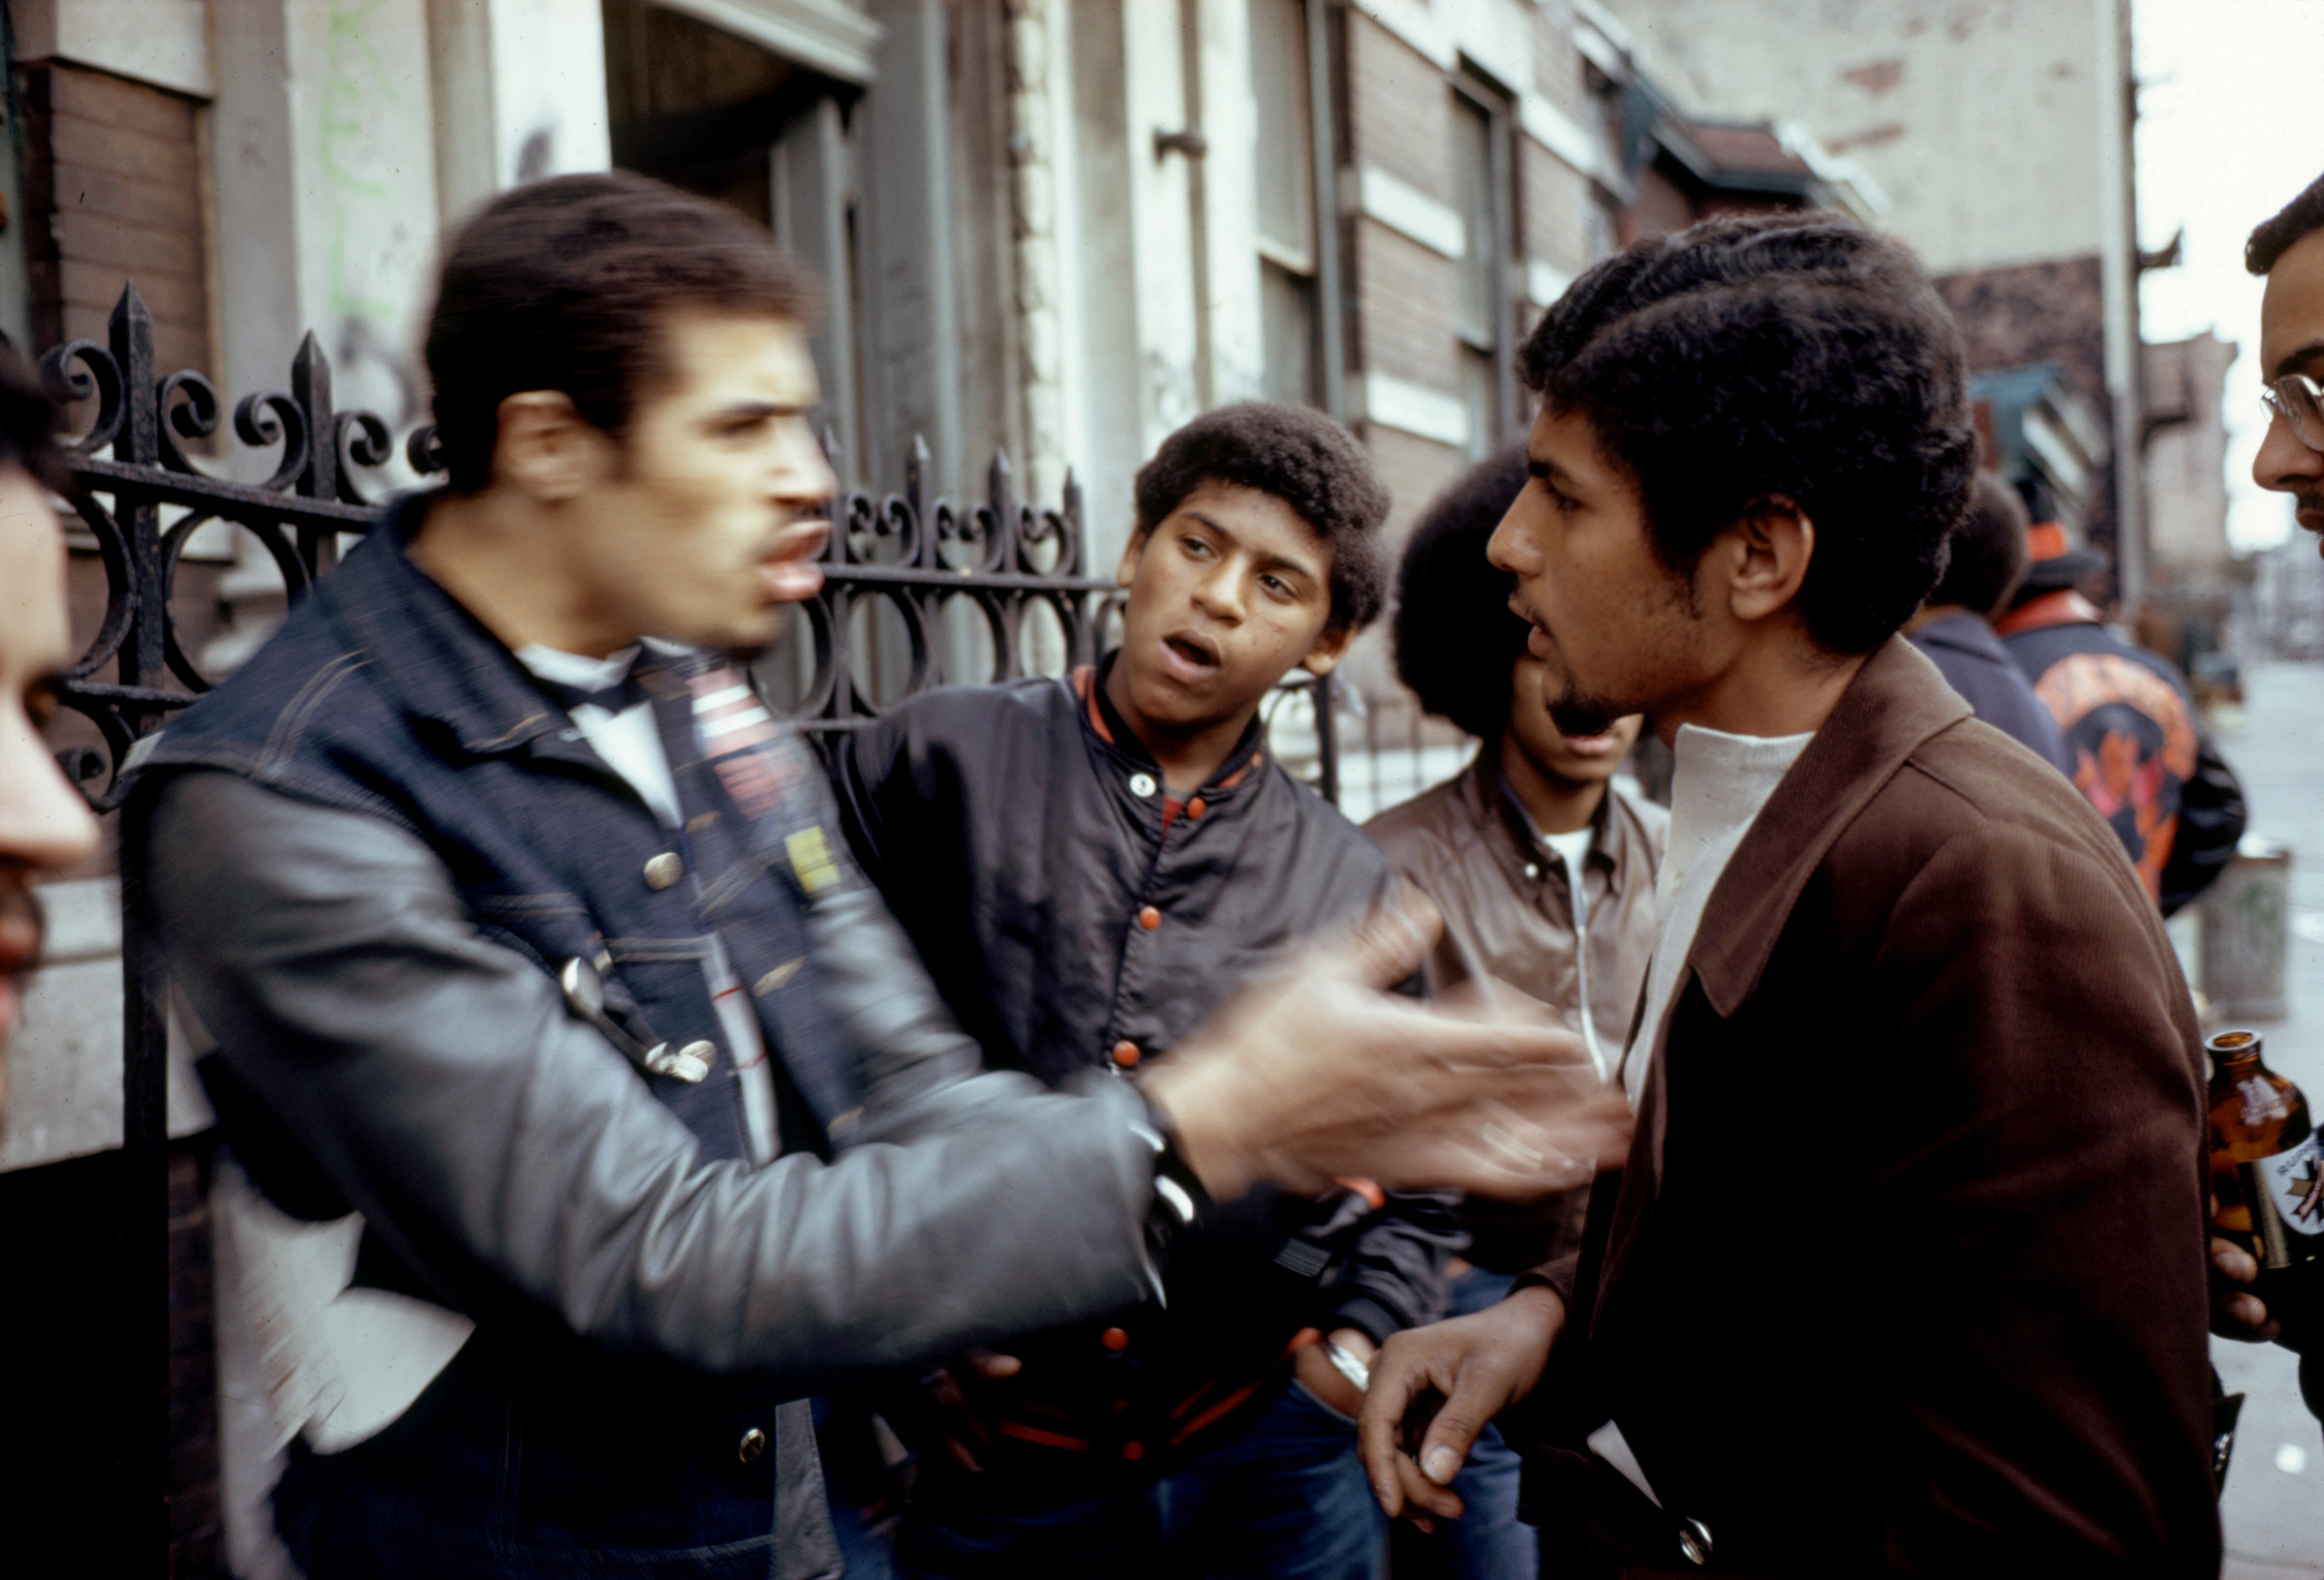 Eddie Cuevas from the gang 'Reapers' discussing with another gang called the 'Javelins' about cleaning up the neighborhood, Bronx, New York, 1972.